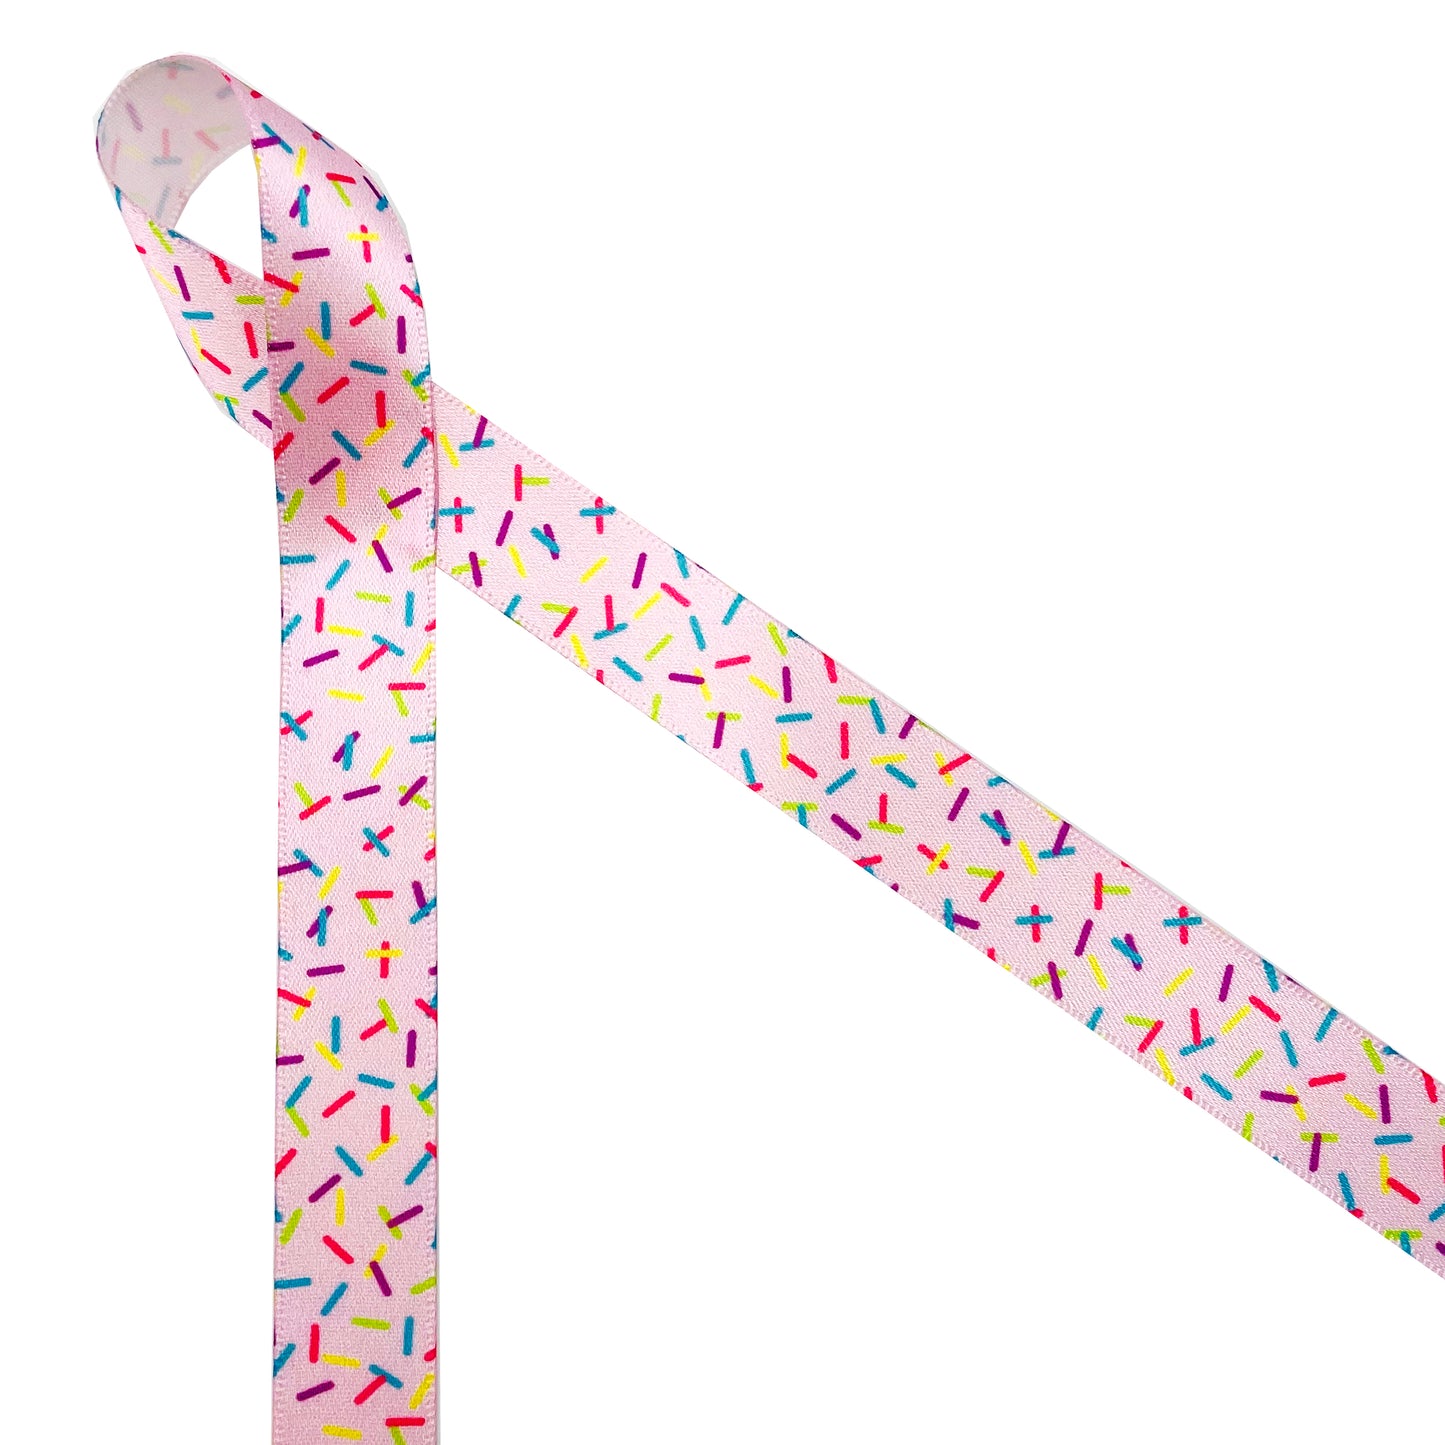 Sprinkles ribbon sprinkles in rainbow colors on a blue or pink background printed on 5/8" white single face satin,